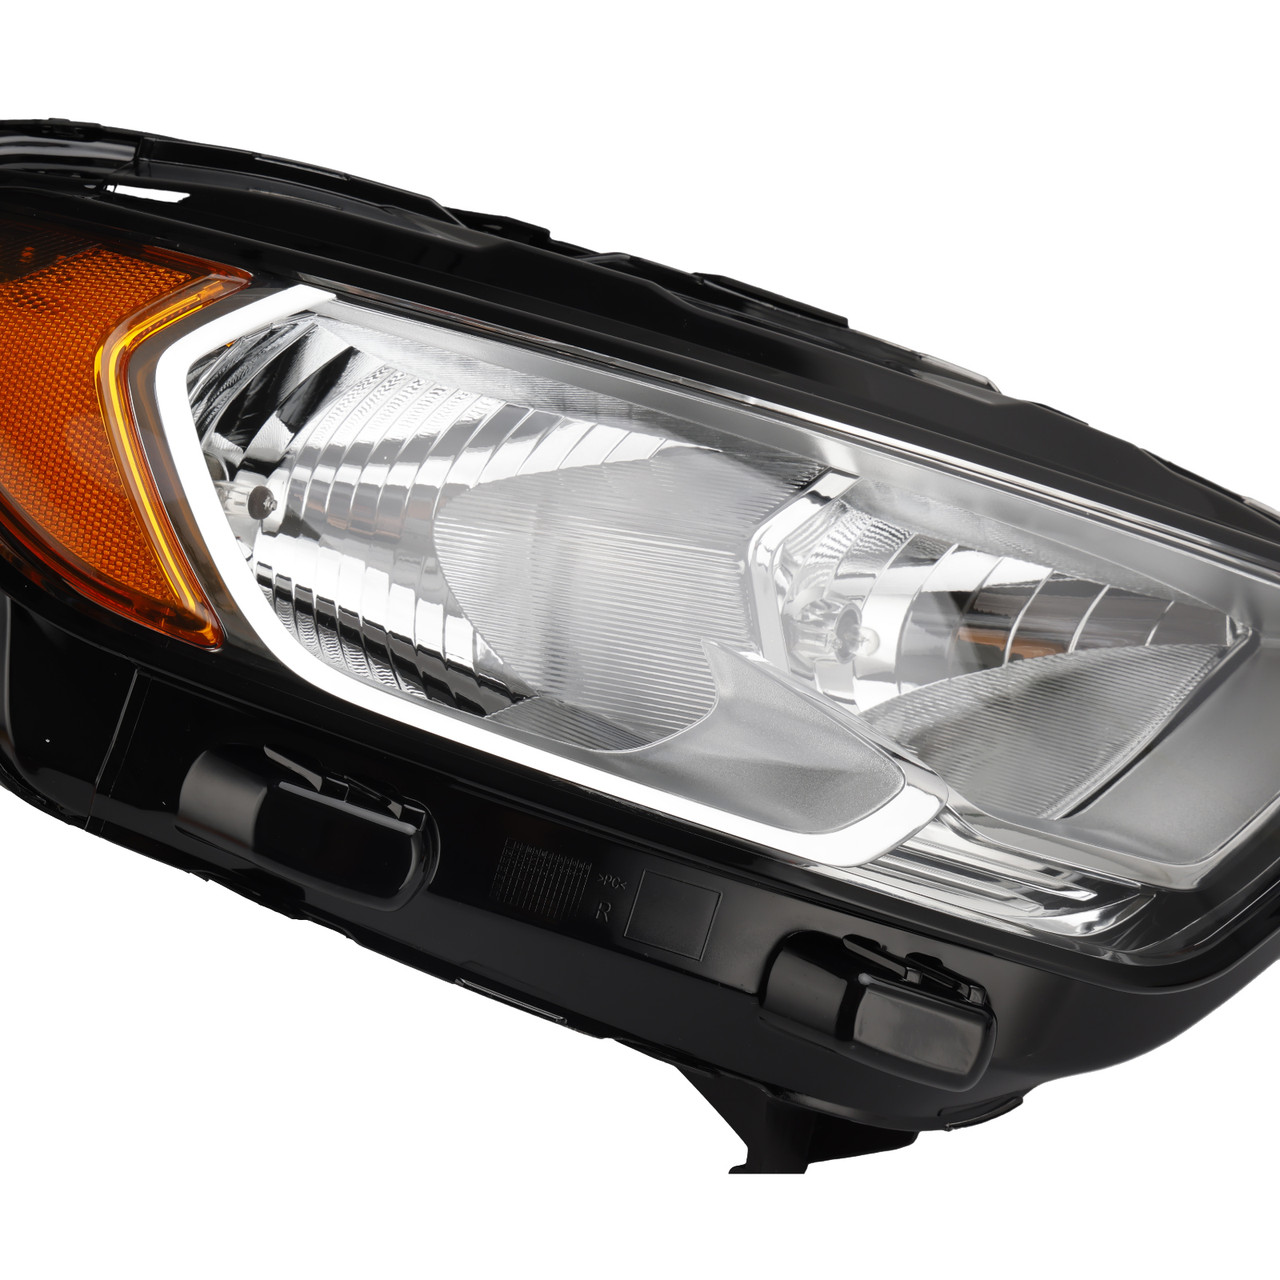 Left+ Rihgt Headlight With Bulbs Halogen For Ford EcoSport 2018-2022